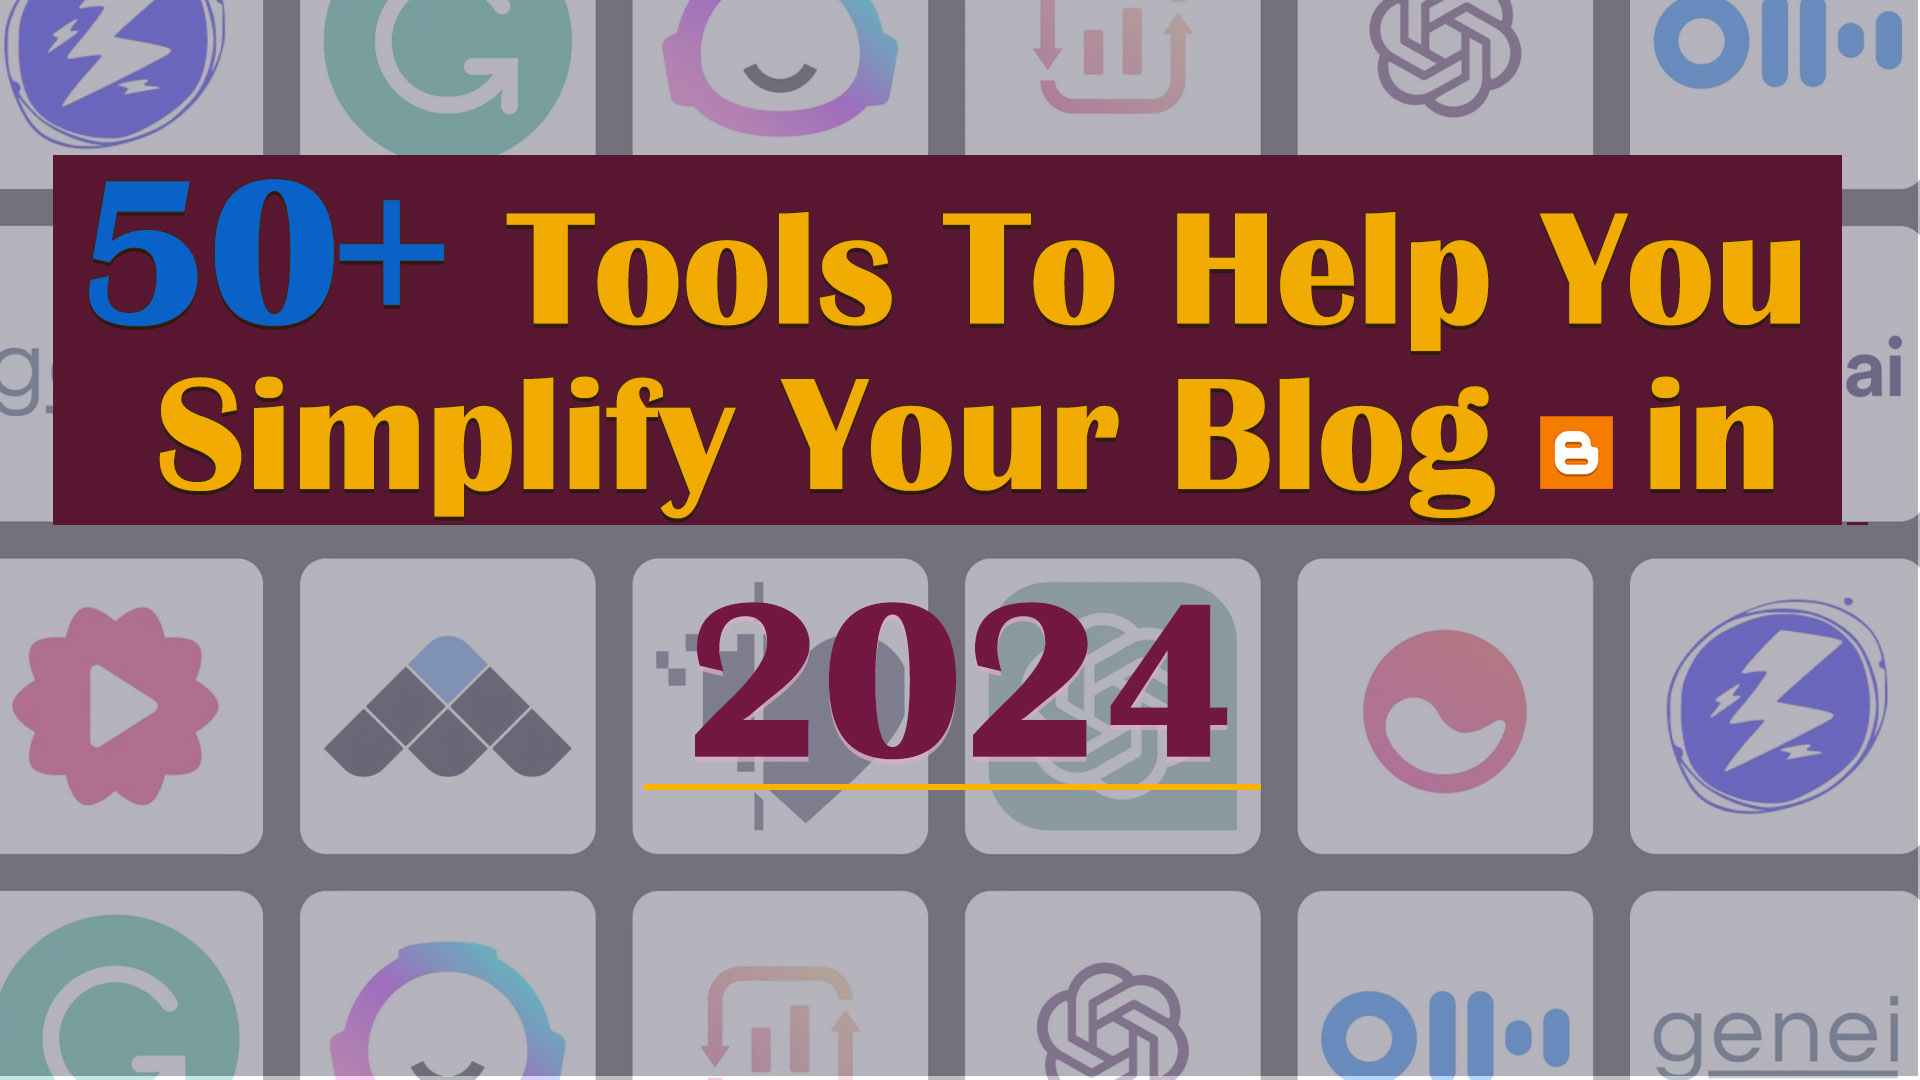 50+ Tools To Help You simplify Your Blog in 2024